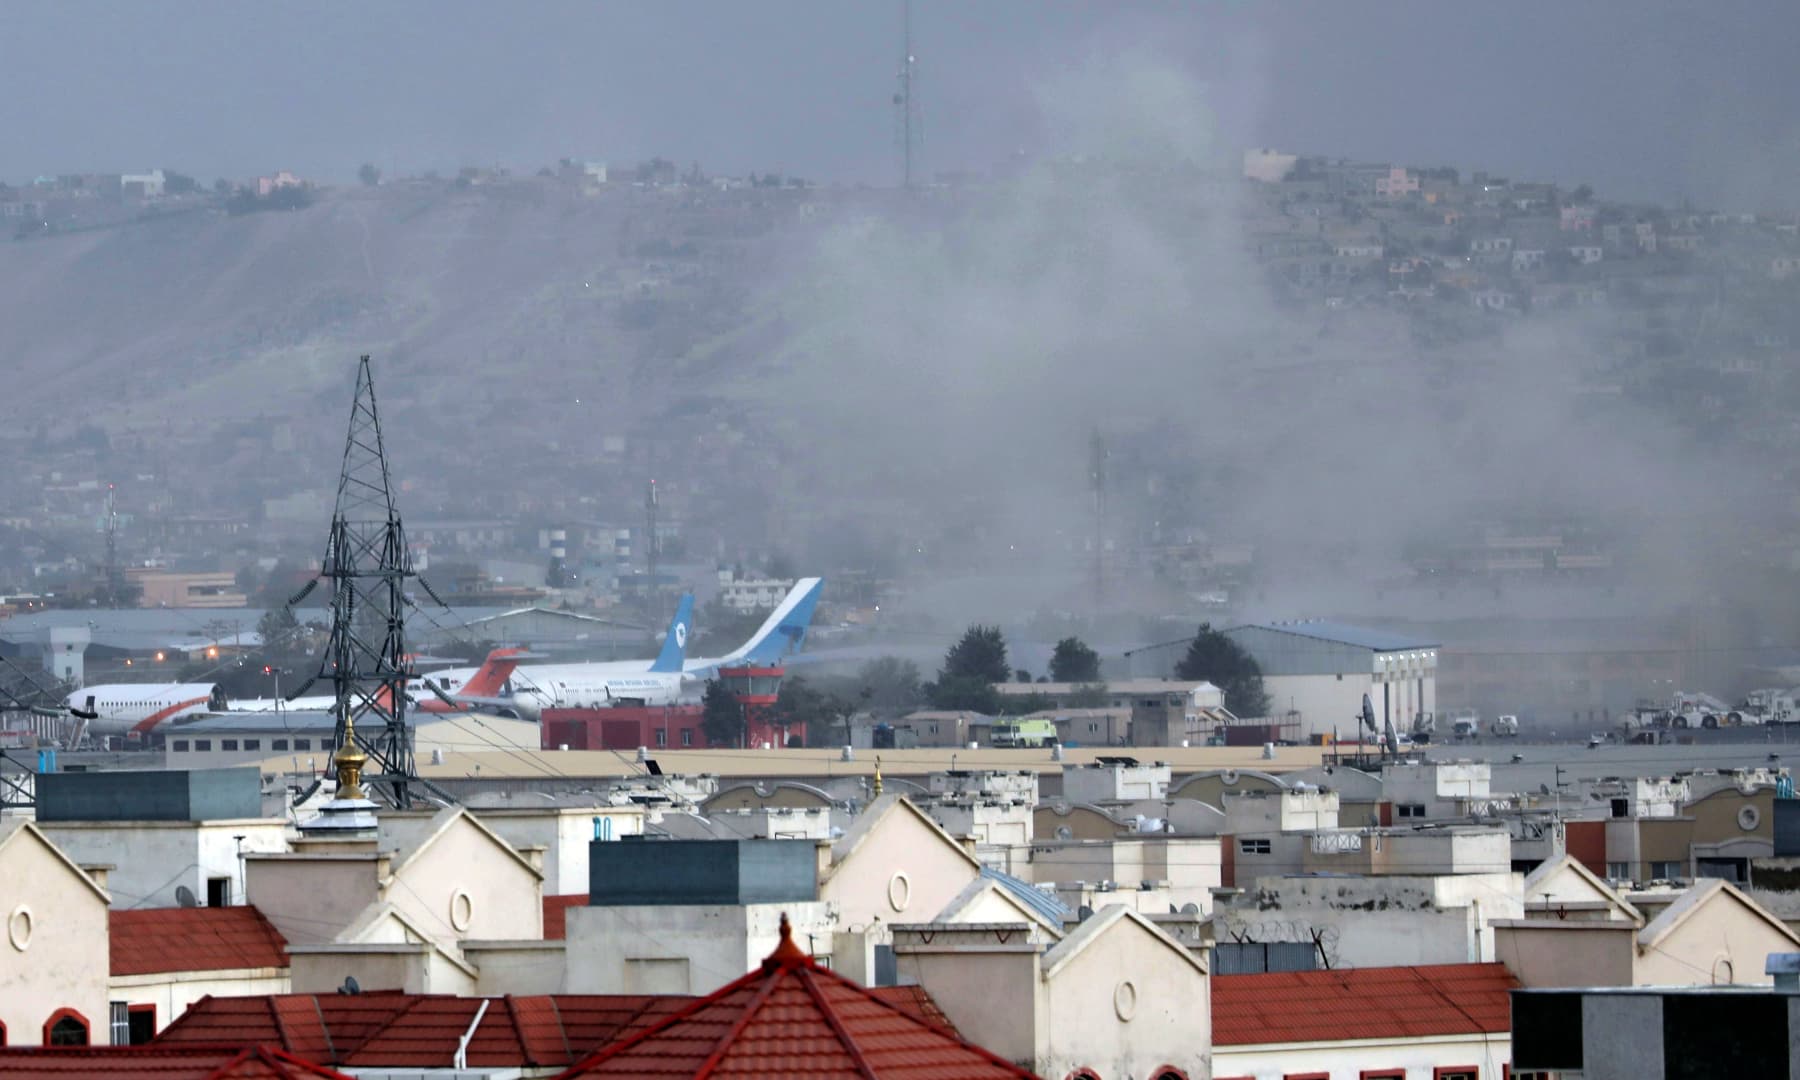 Smoke rises from a deadly explosion outside the airport in Kabul, Afghanistan on August 26, 2021. — AP